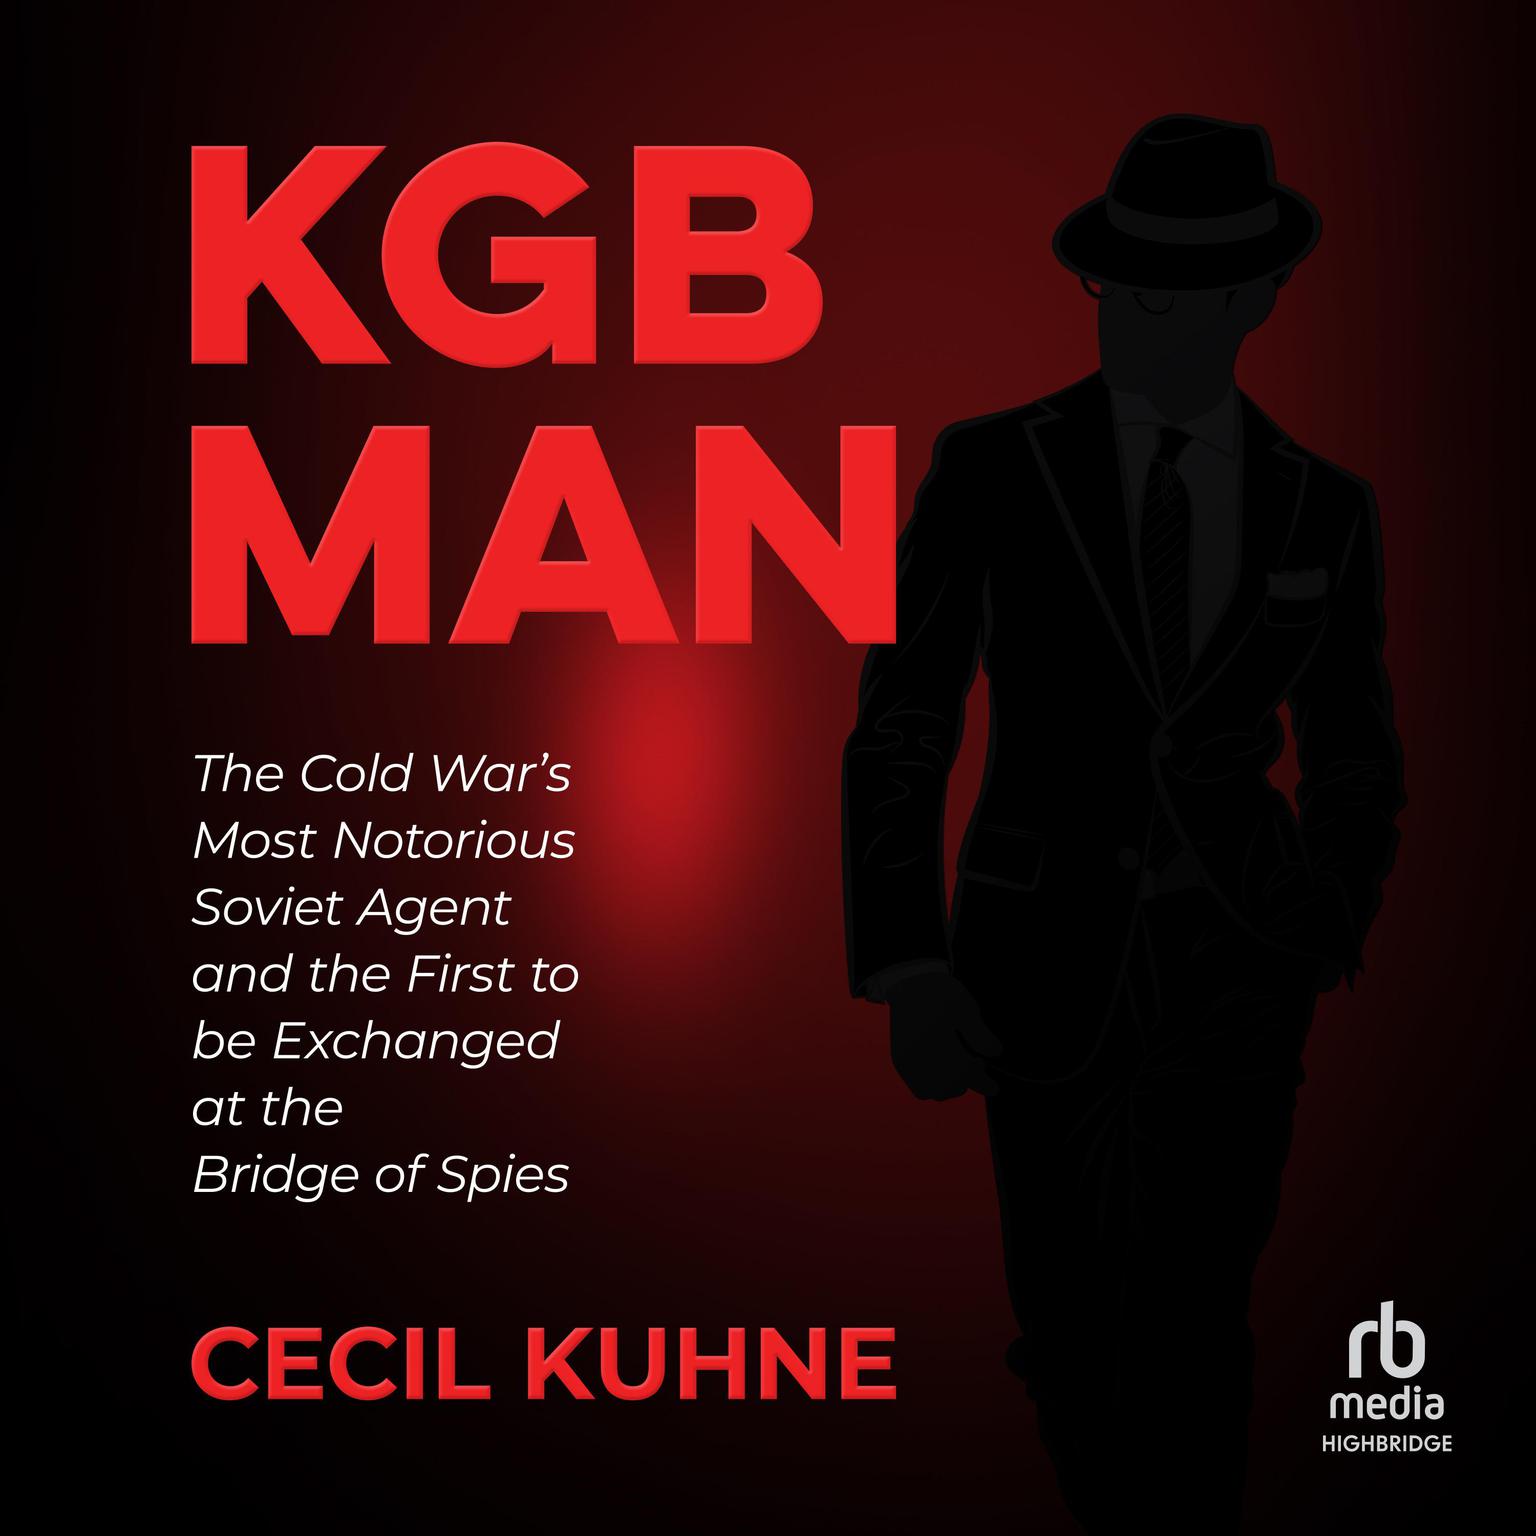 KGB Man: The Cold Wars Most Notorious Soviet Agent and the First to be Exchanged at the Bridge of Spies Audiobook, by Cecil Kuhne